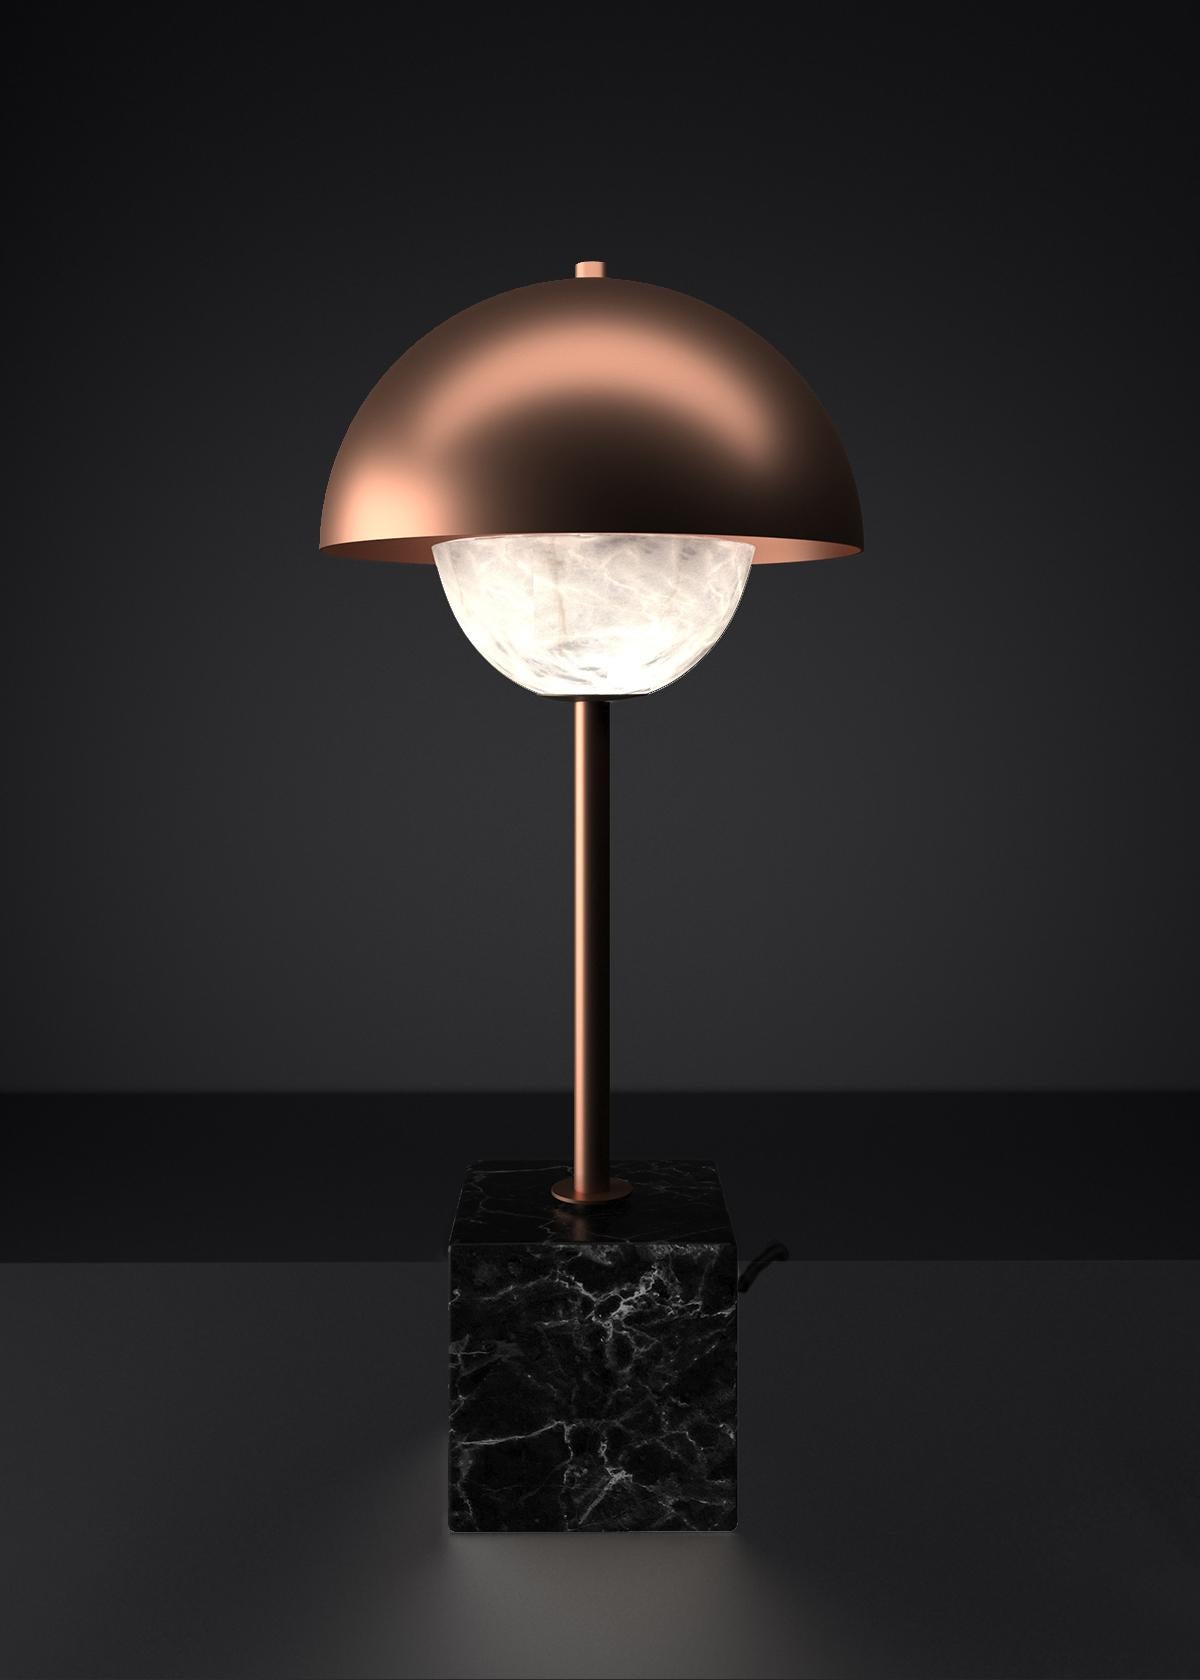 Apollo Copper Table Lamp by Alabastro Italiano
Dimensions: D 30 x W 30 x H 74 cm.
Materials: White alabaster, Nero Marquinia marble, black silk cables and copper.

Available in different finishes: Shiny Silver, Bronze, Brushed Brass, Ruggine of